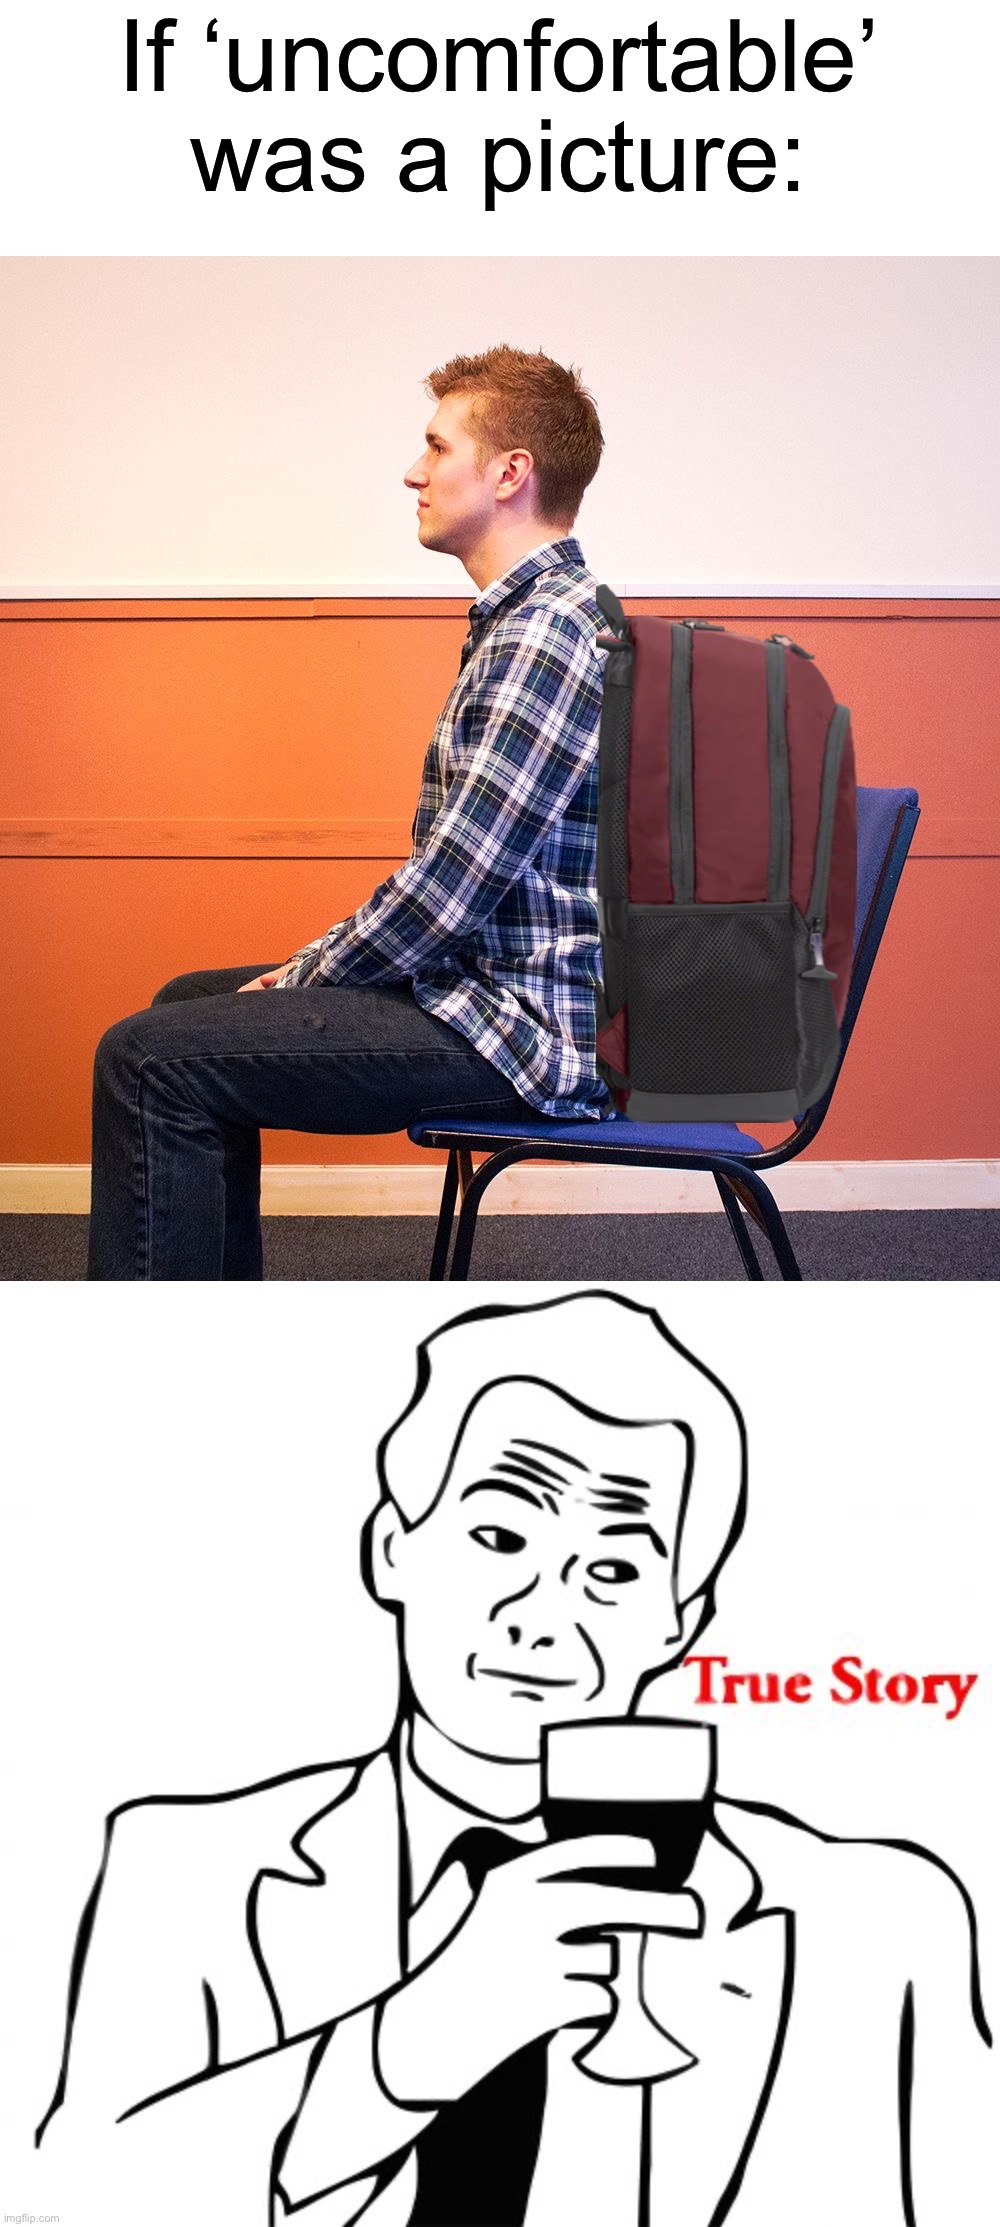 The worst thing is sitting in a chair with a backpack on | If ‘uncomfortable’ was a picture: | image tagged in memes,true story,funny,relatable memes,funny memes,backpack | made w/ Imgflip meme maker